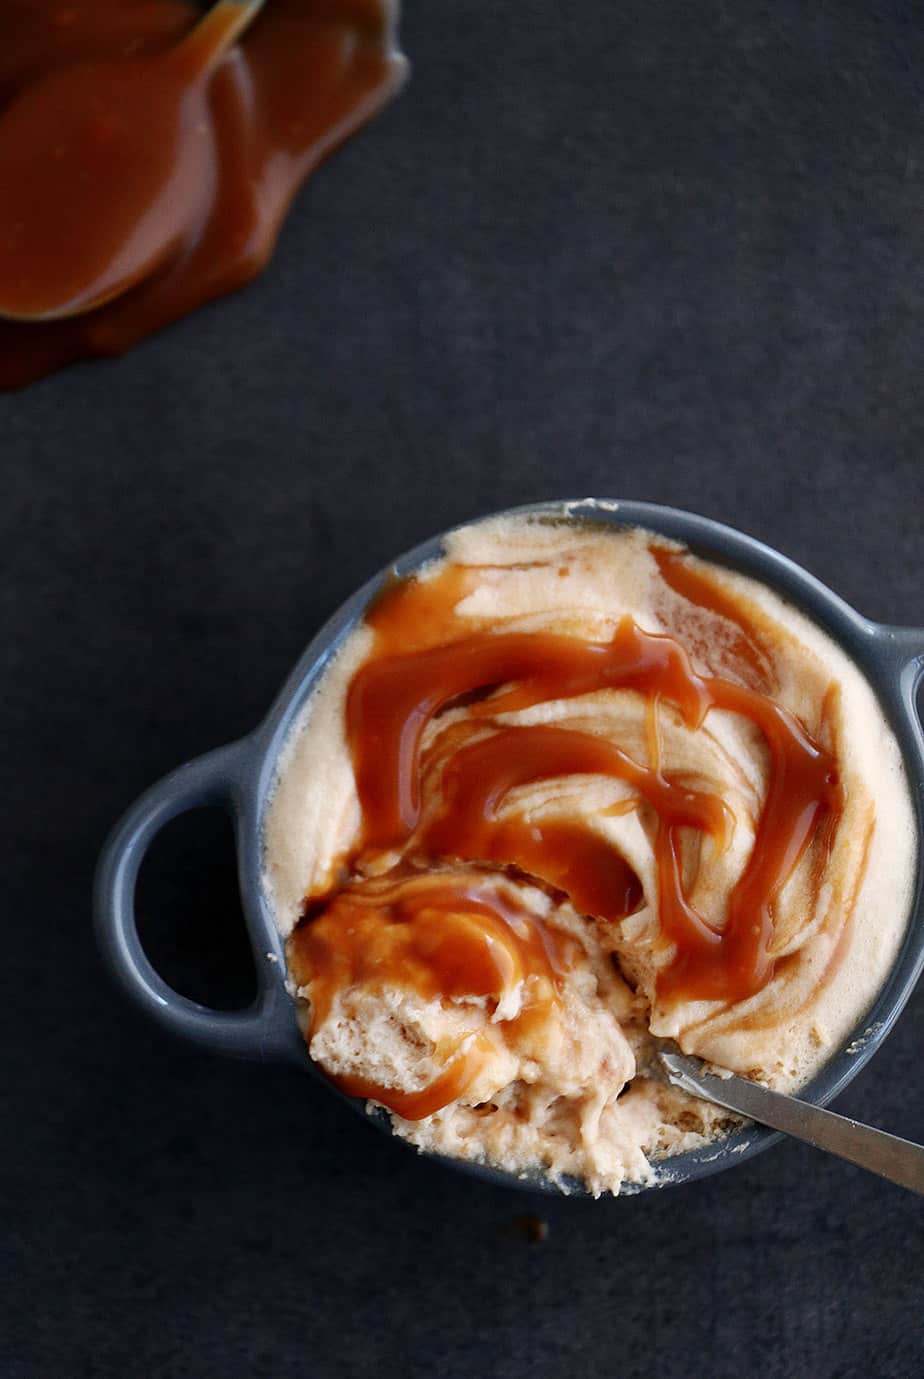 Creamy Salted Caramel Mousse – A combination of creamy, salty, fluffy and sweet. The perfect dessert for any occasion.